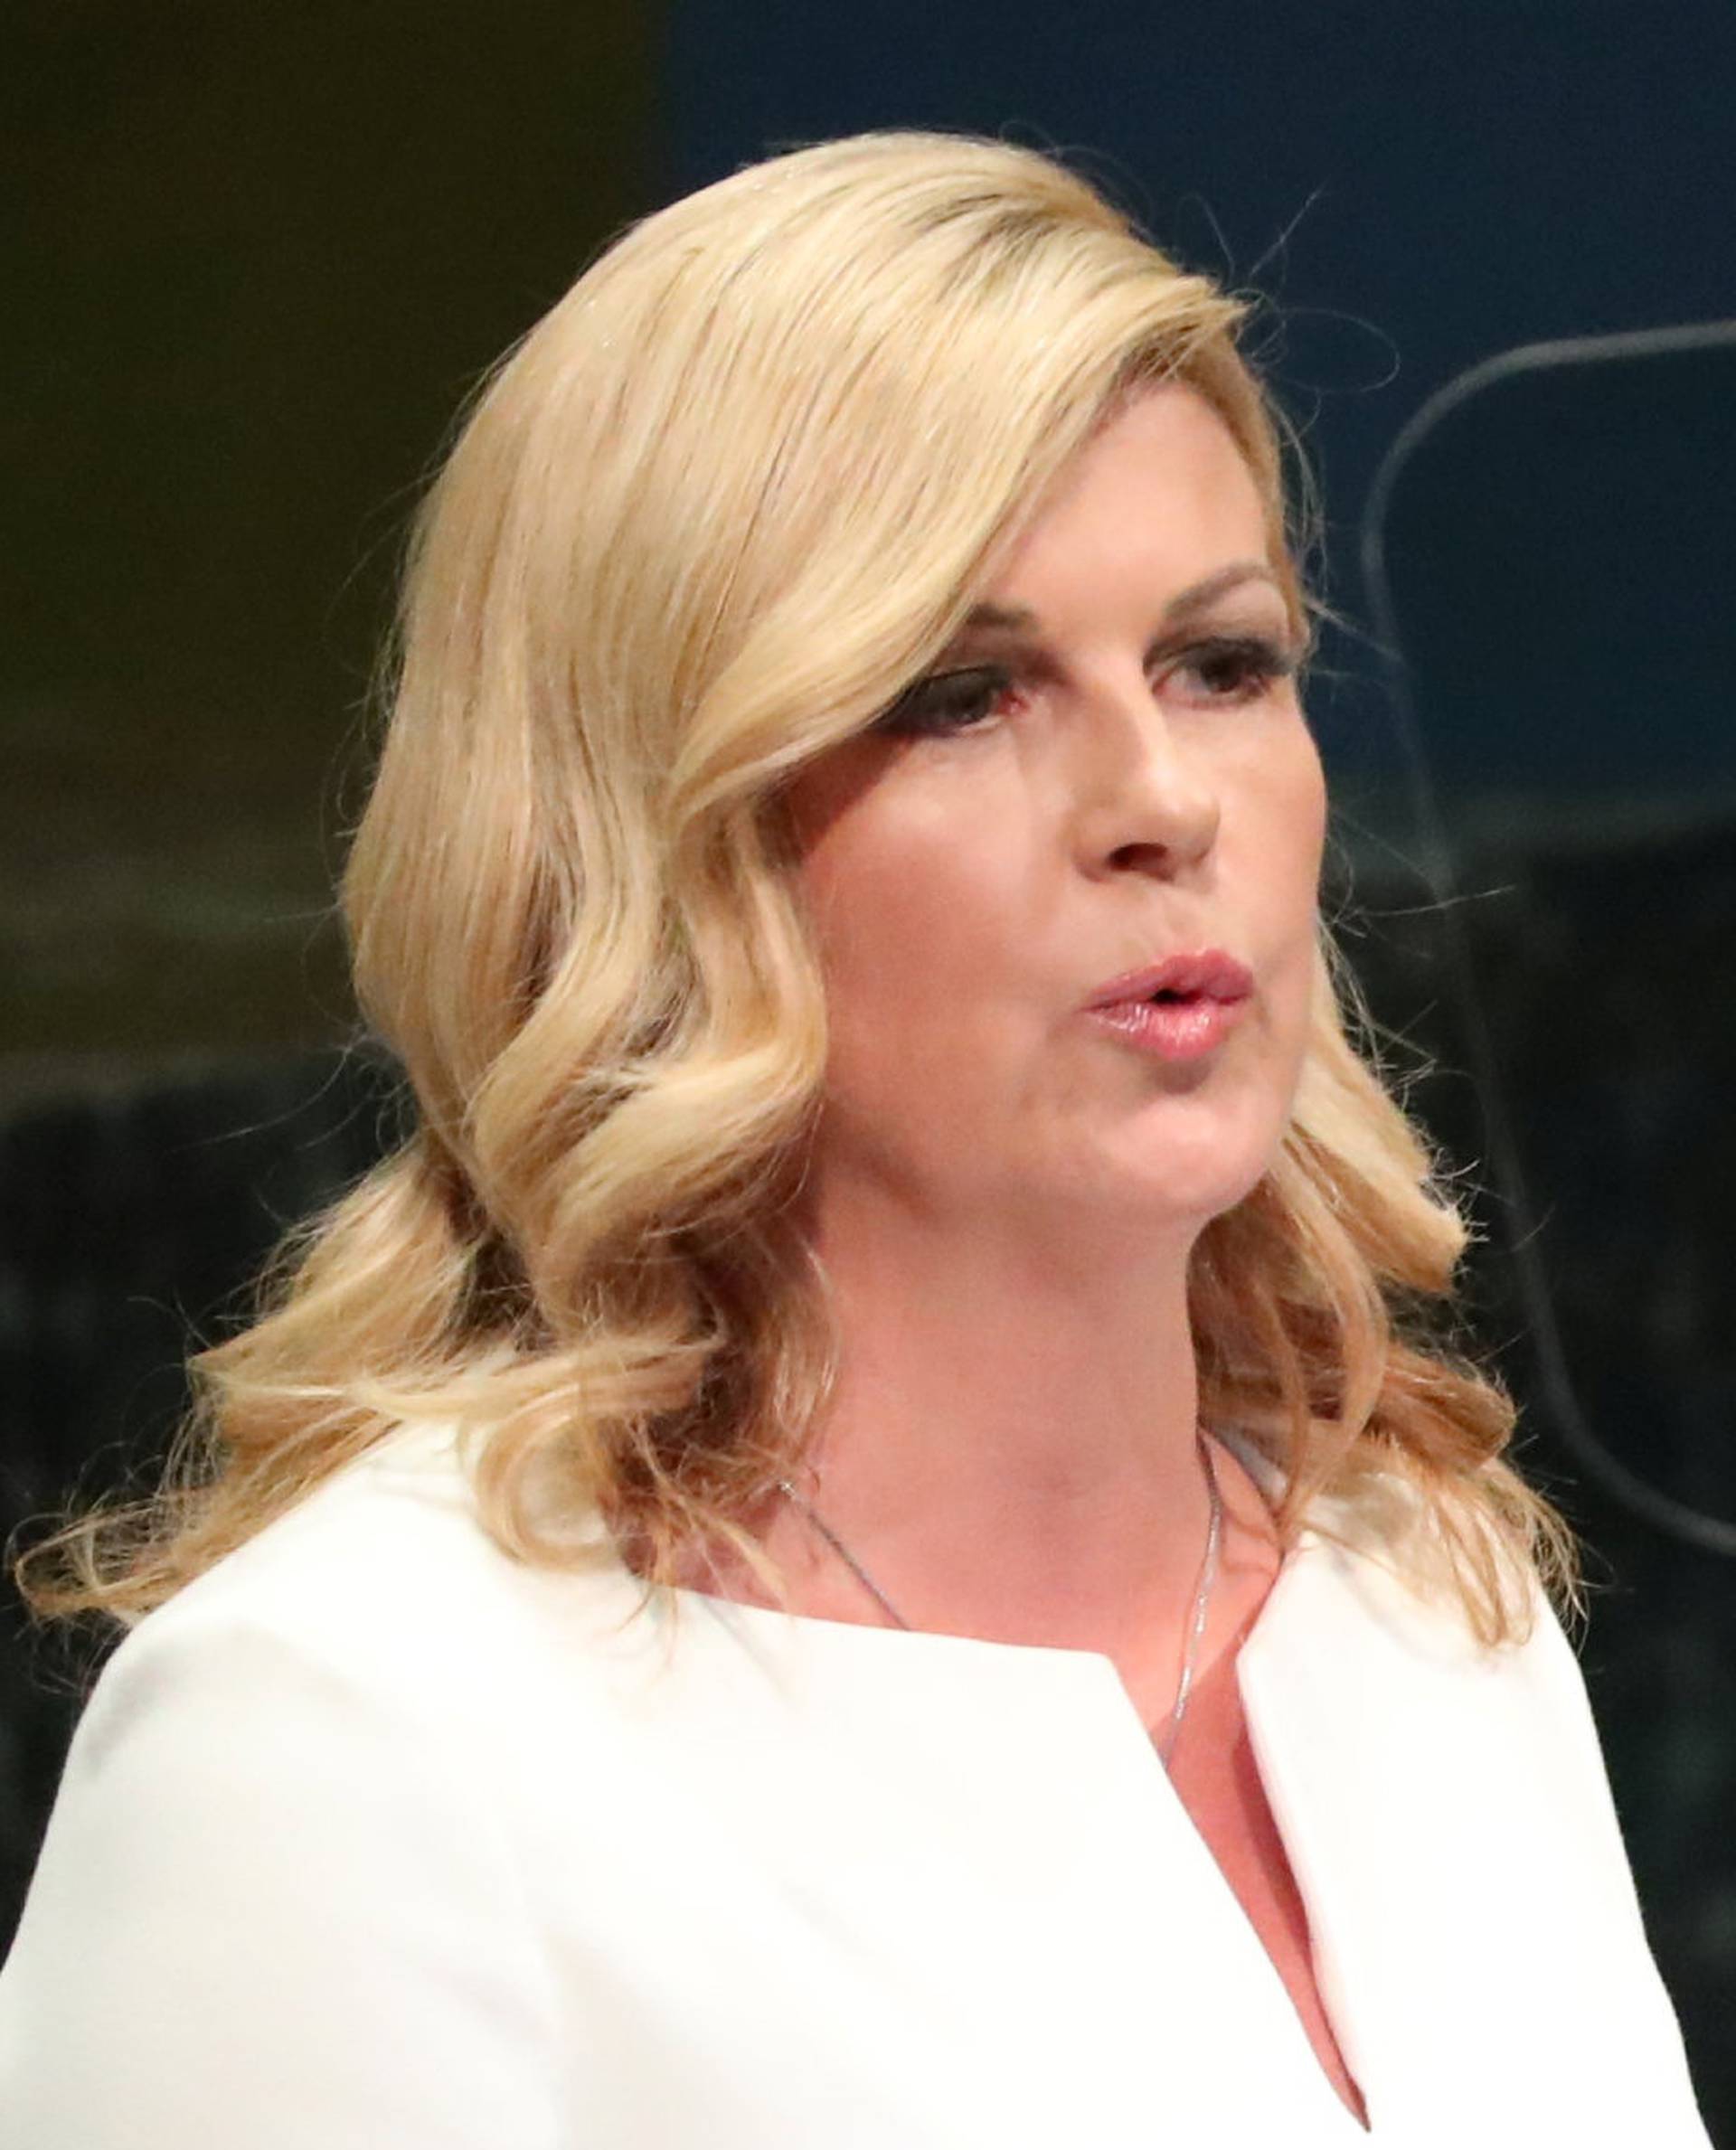 President of Croatia Kolinda Grabar-Kitarovic speaks at the Nelson Mandela Peace Summit during the 73rd United Nations General Assembly in New York